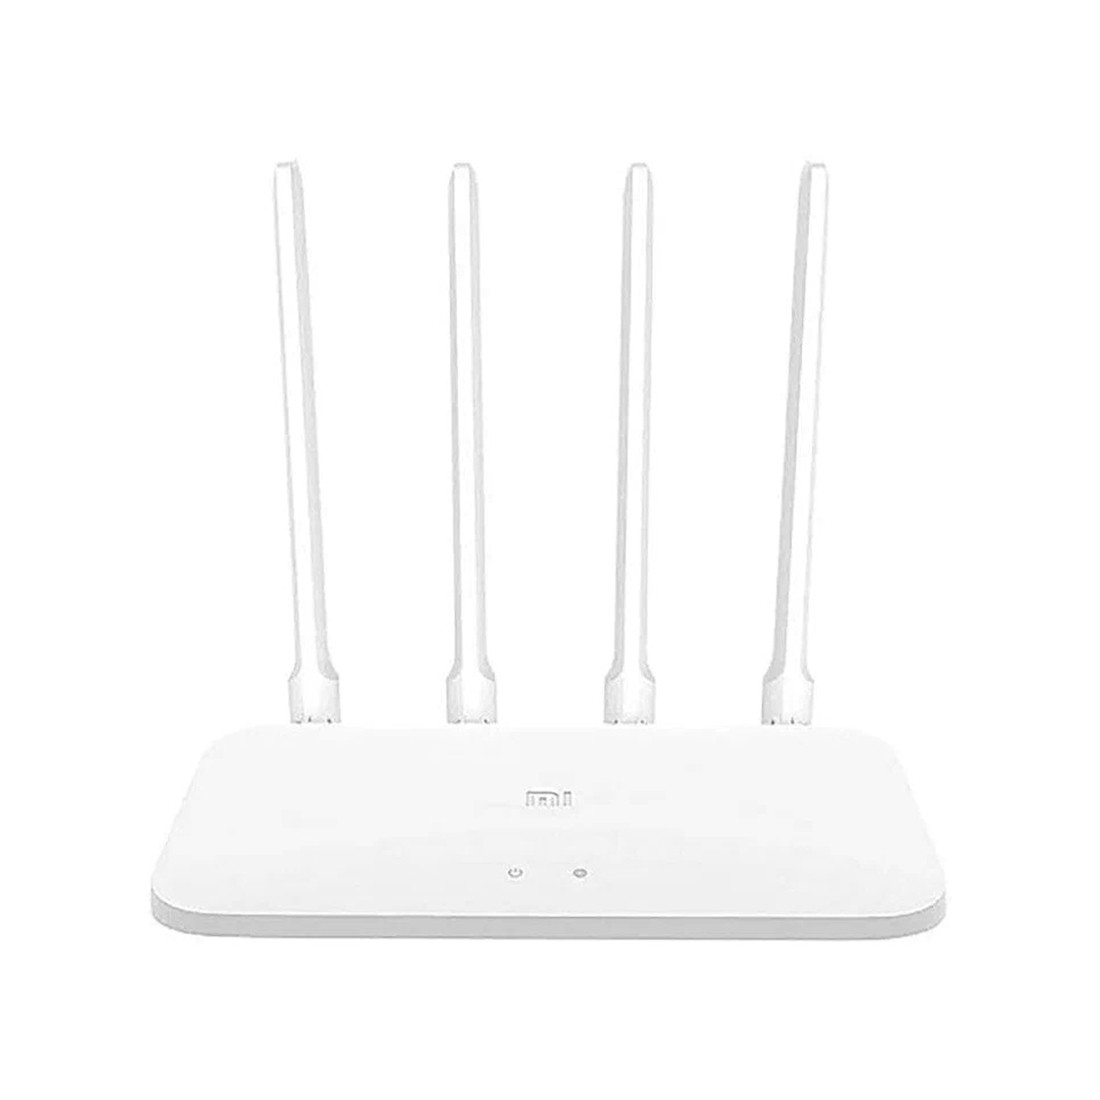 Маршрутизатор Xiaomi Router AC1200 - фото 2 - id-p109798803